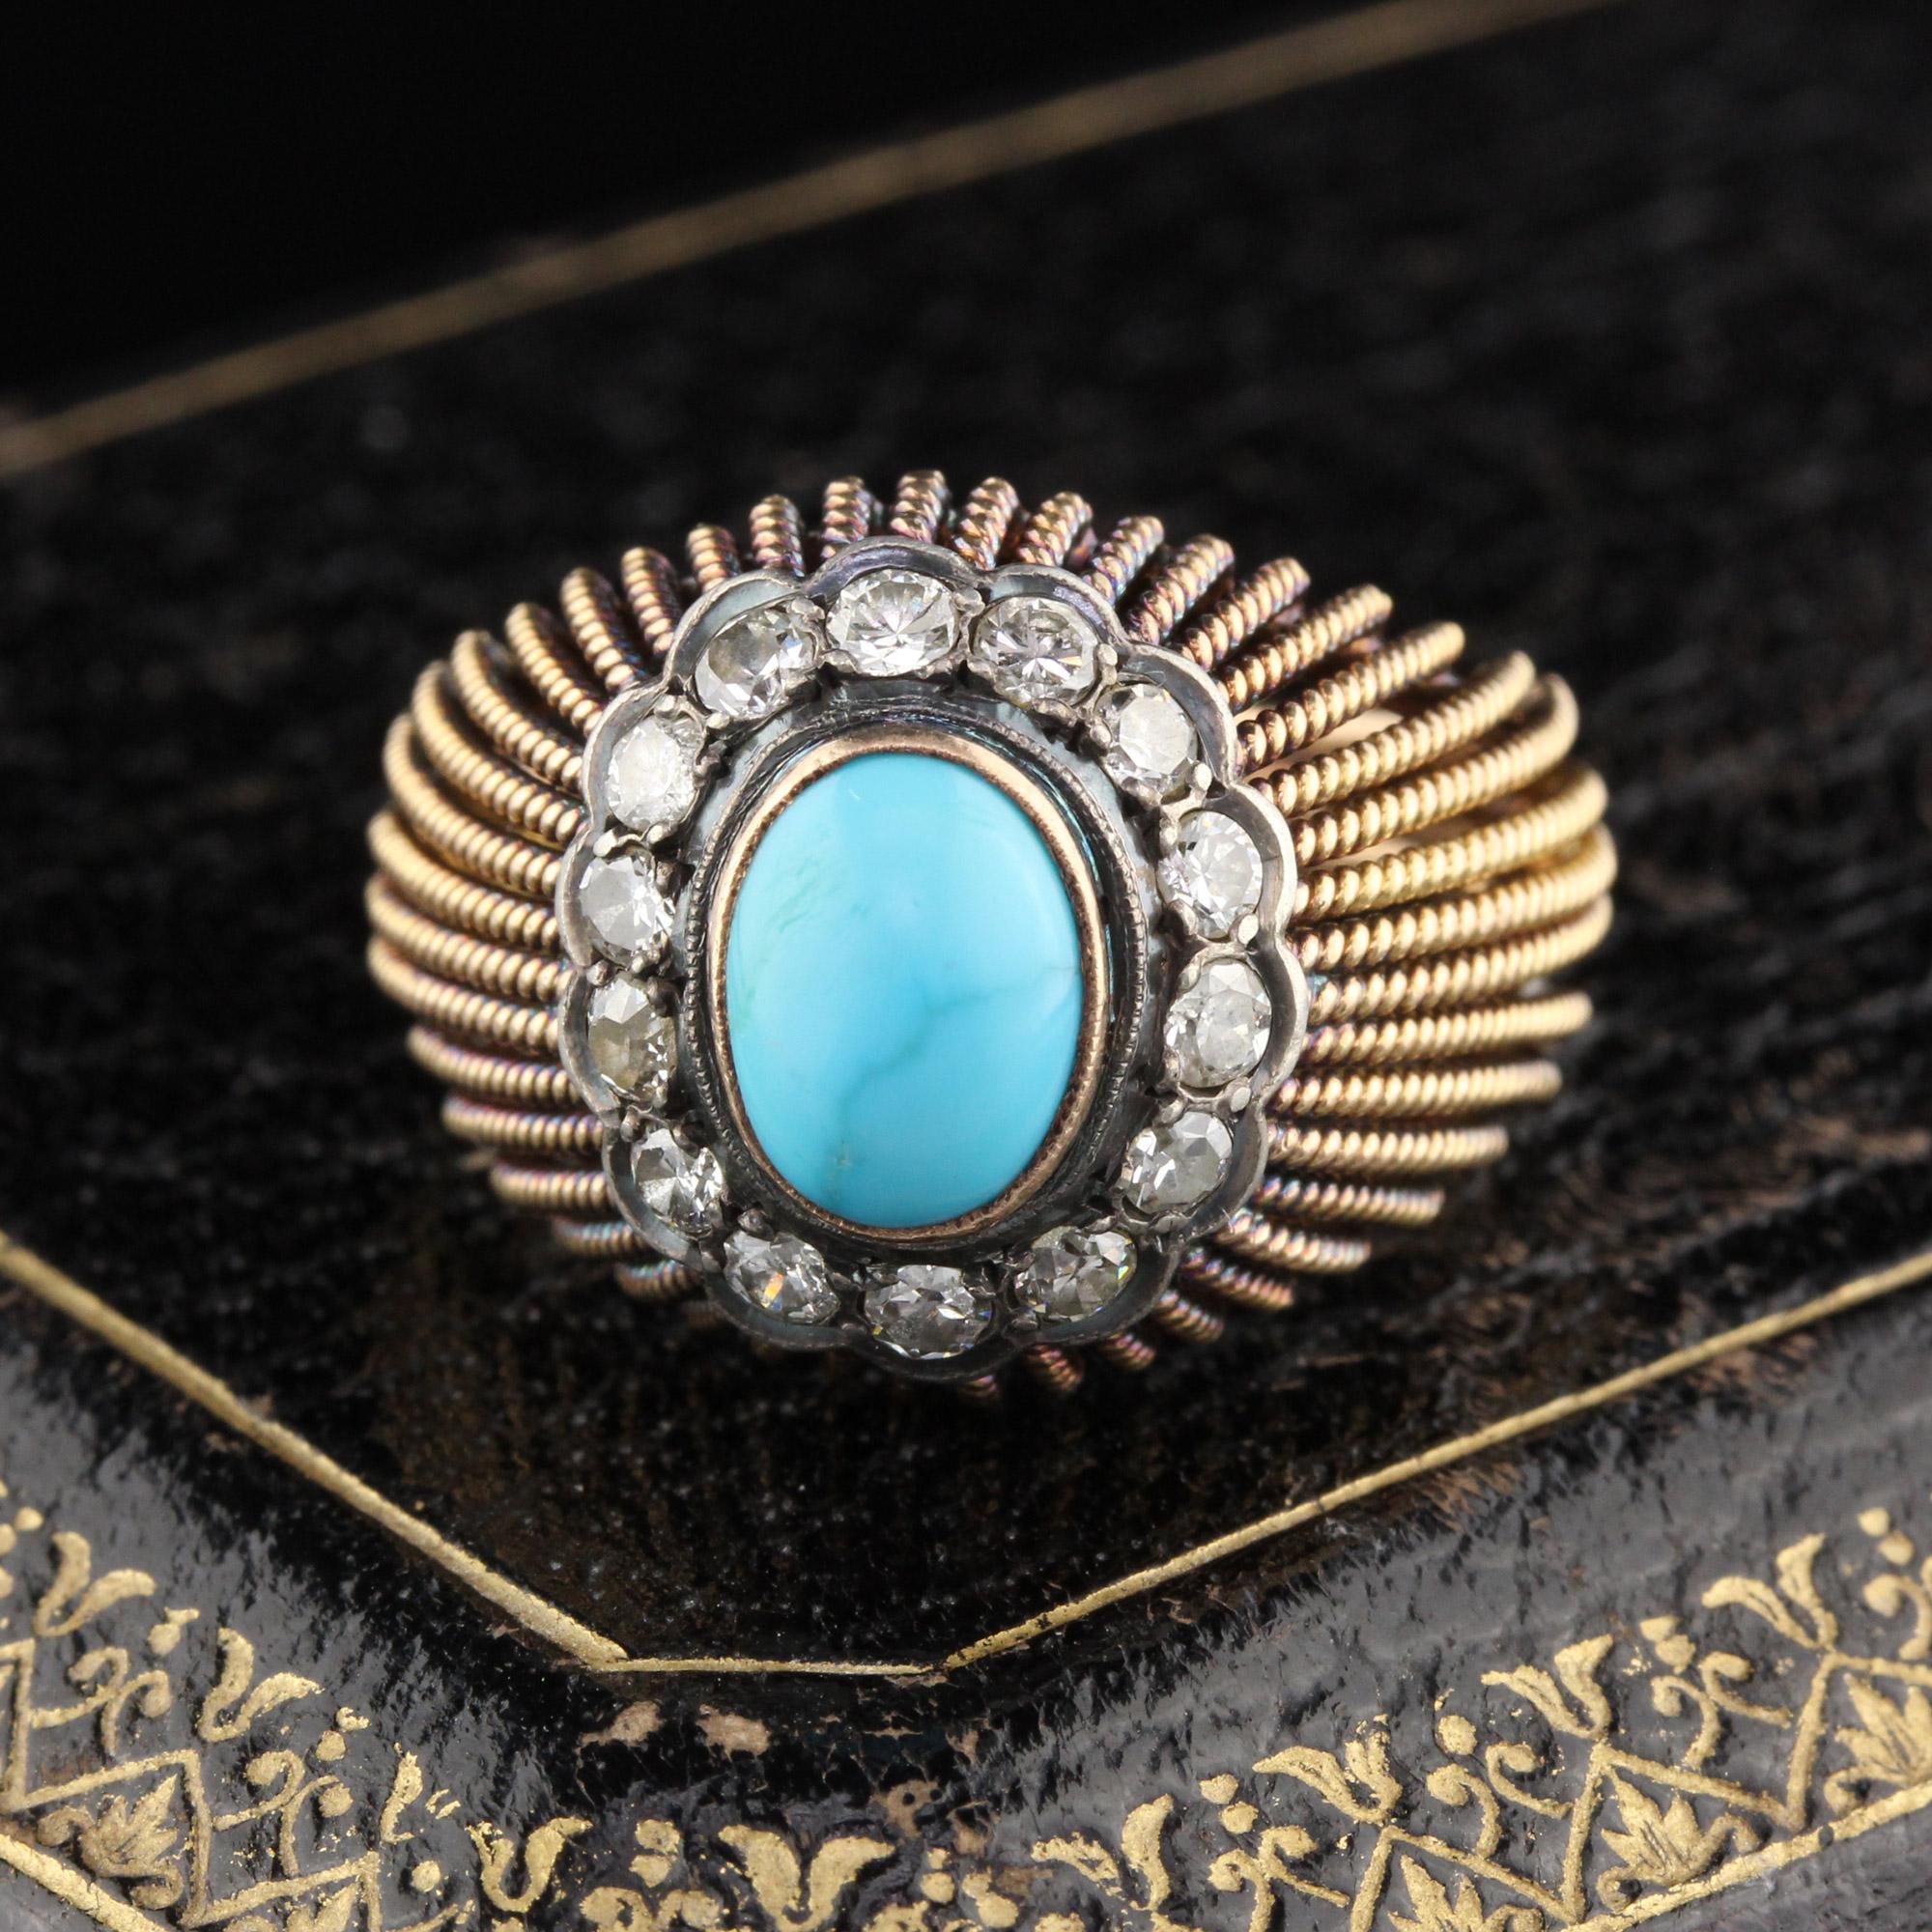 Vintage 18K Yellow Gold cocktail ring with an oval-shaped natural turquoise in the center surrounded by a halo of diamonds. Unique & gorgeous!! 

#R0172

Metal: 18K Yellow Gold and Platinum Top

Weight: 8.7 Grams

Total Diamond Weight: Approximately